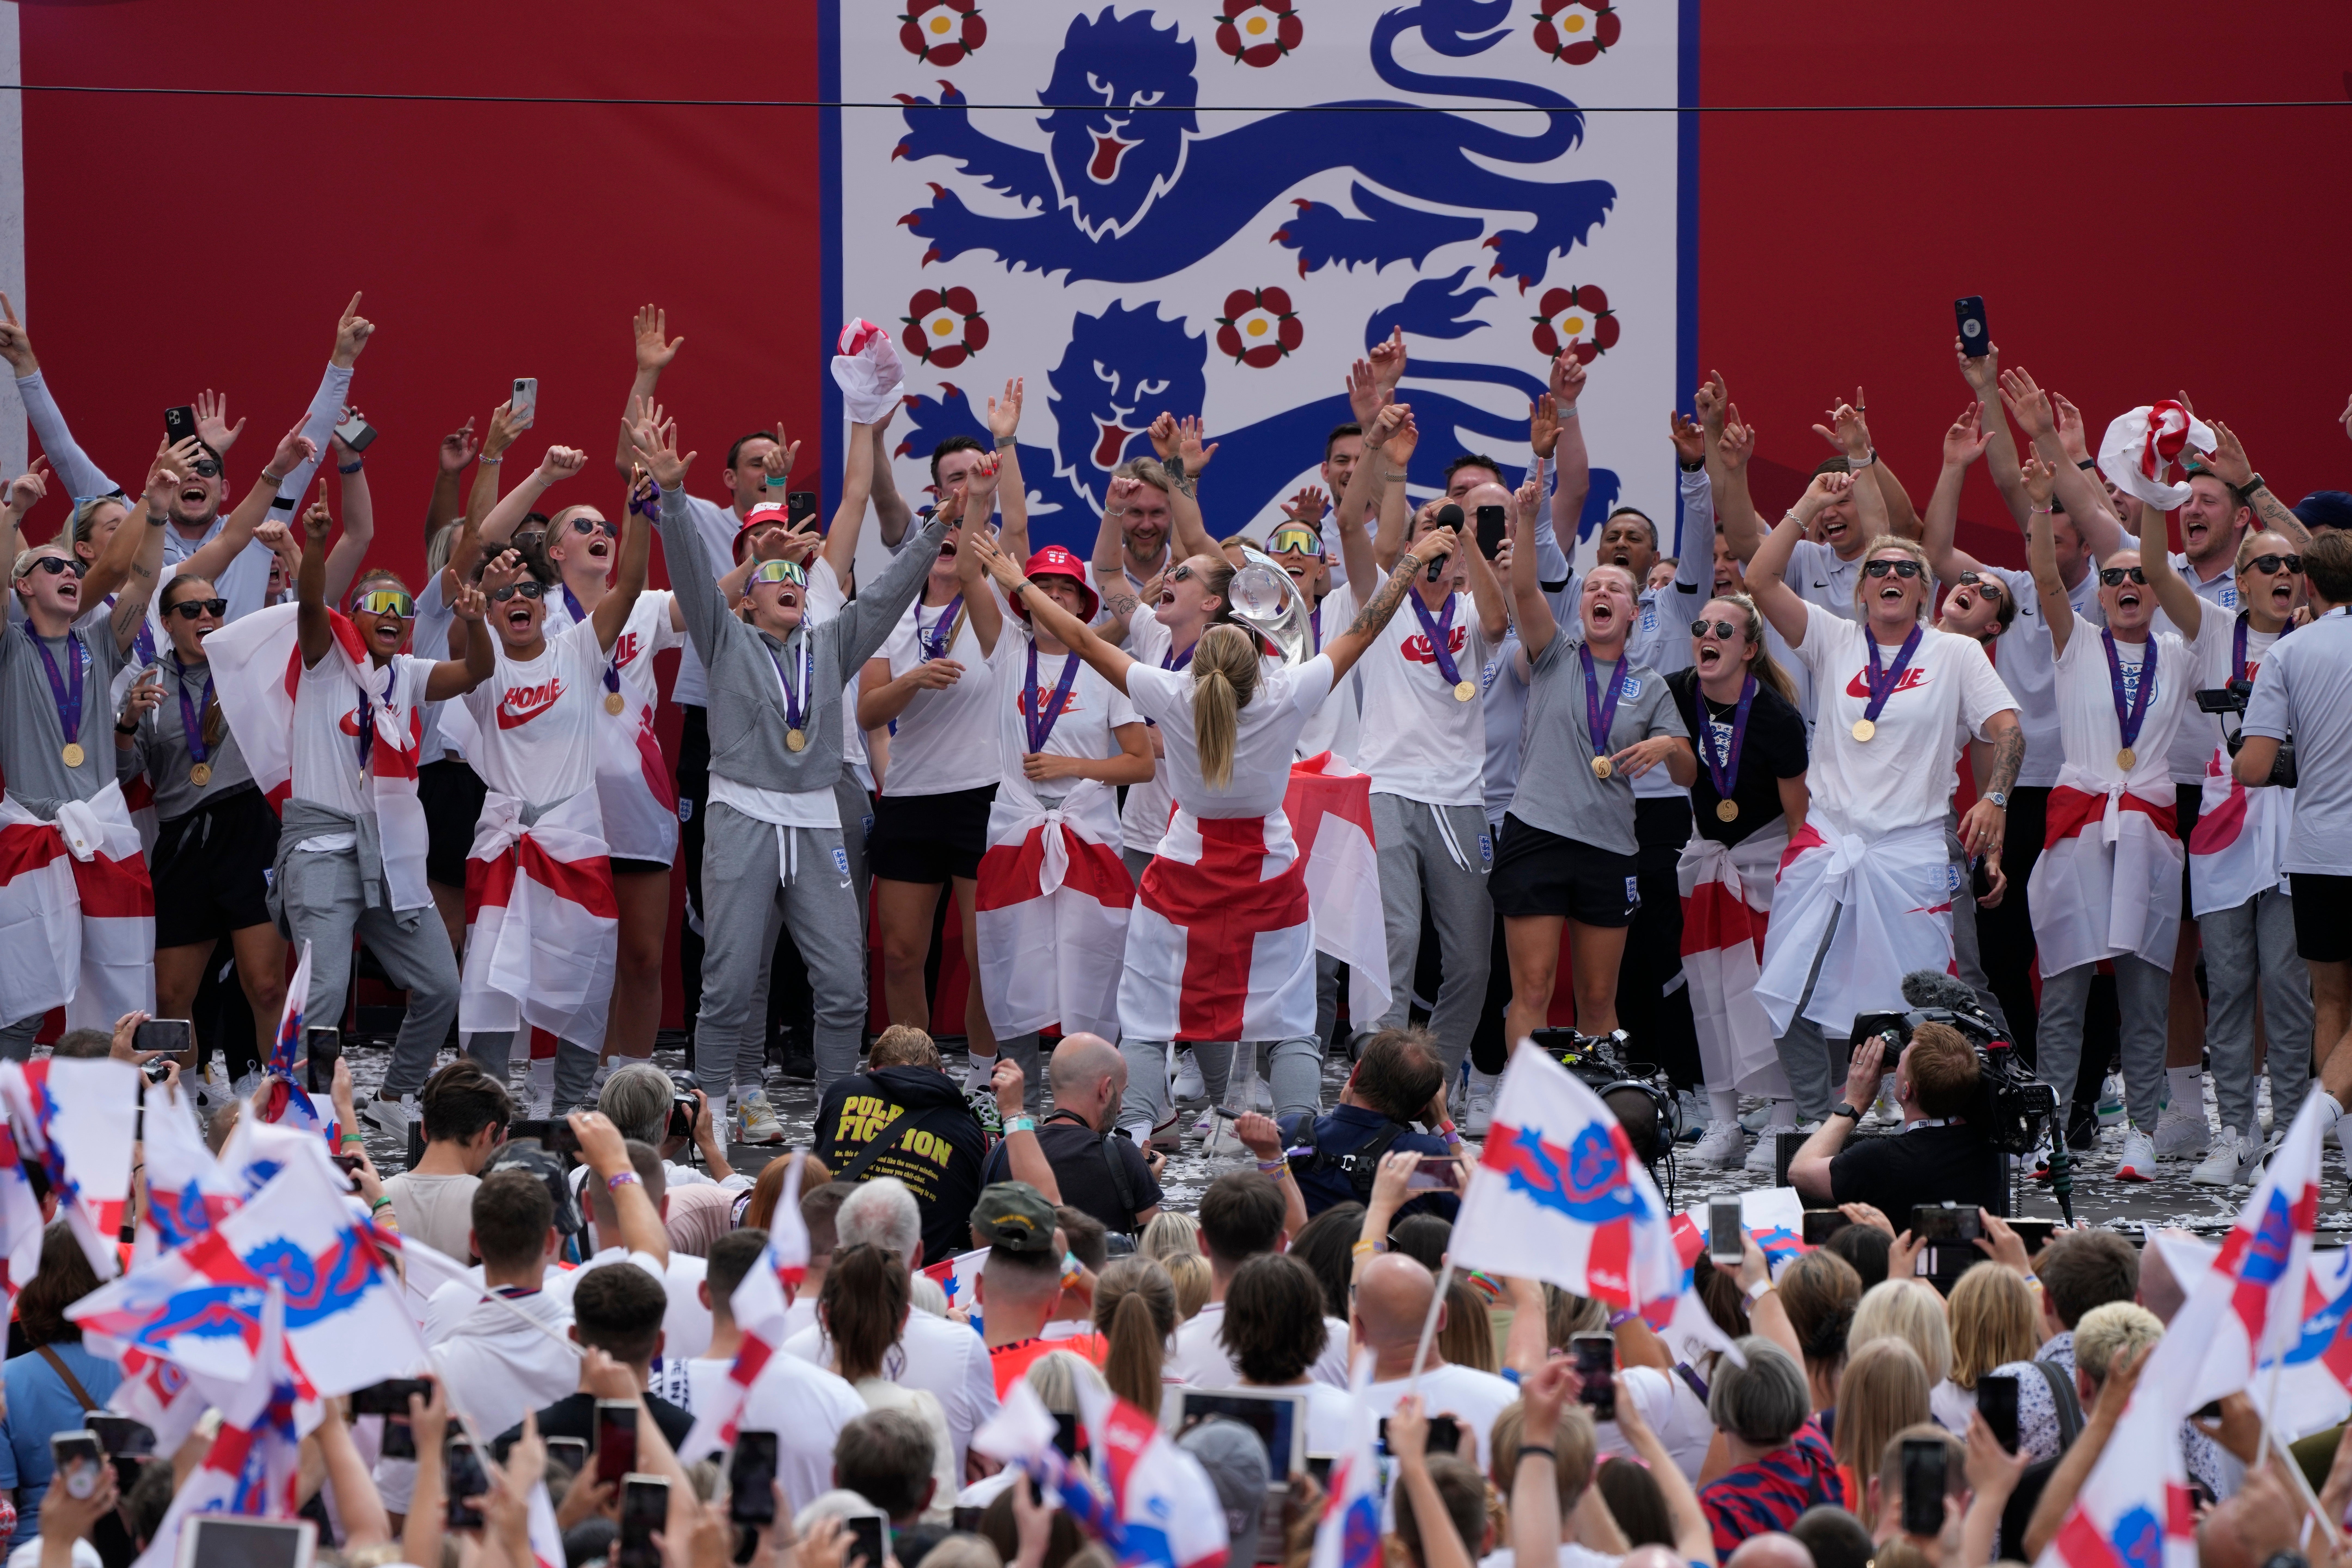 England players celebrate on stage with the crowd